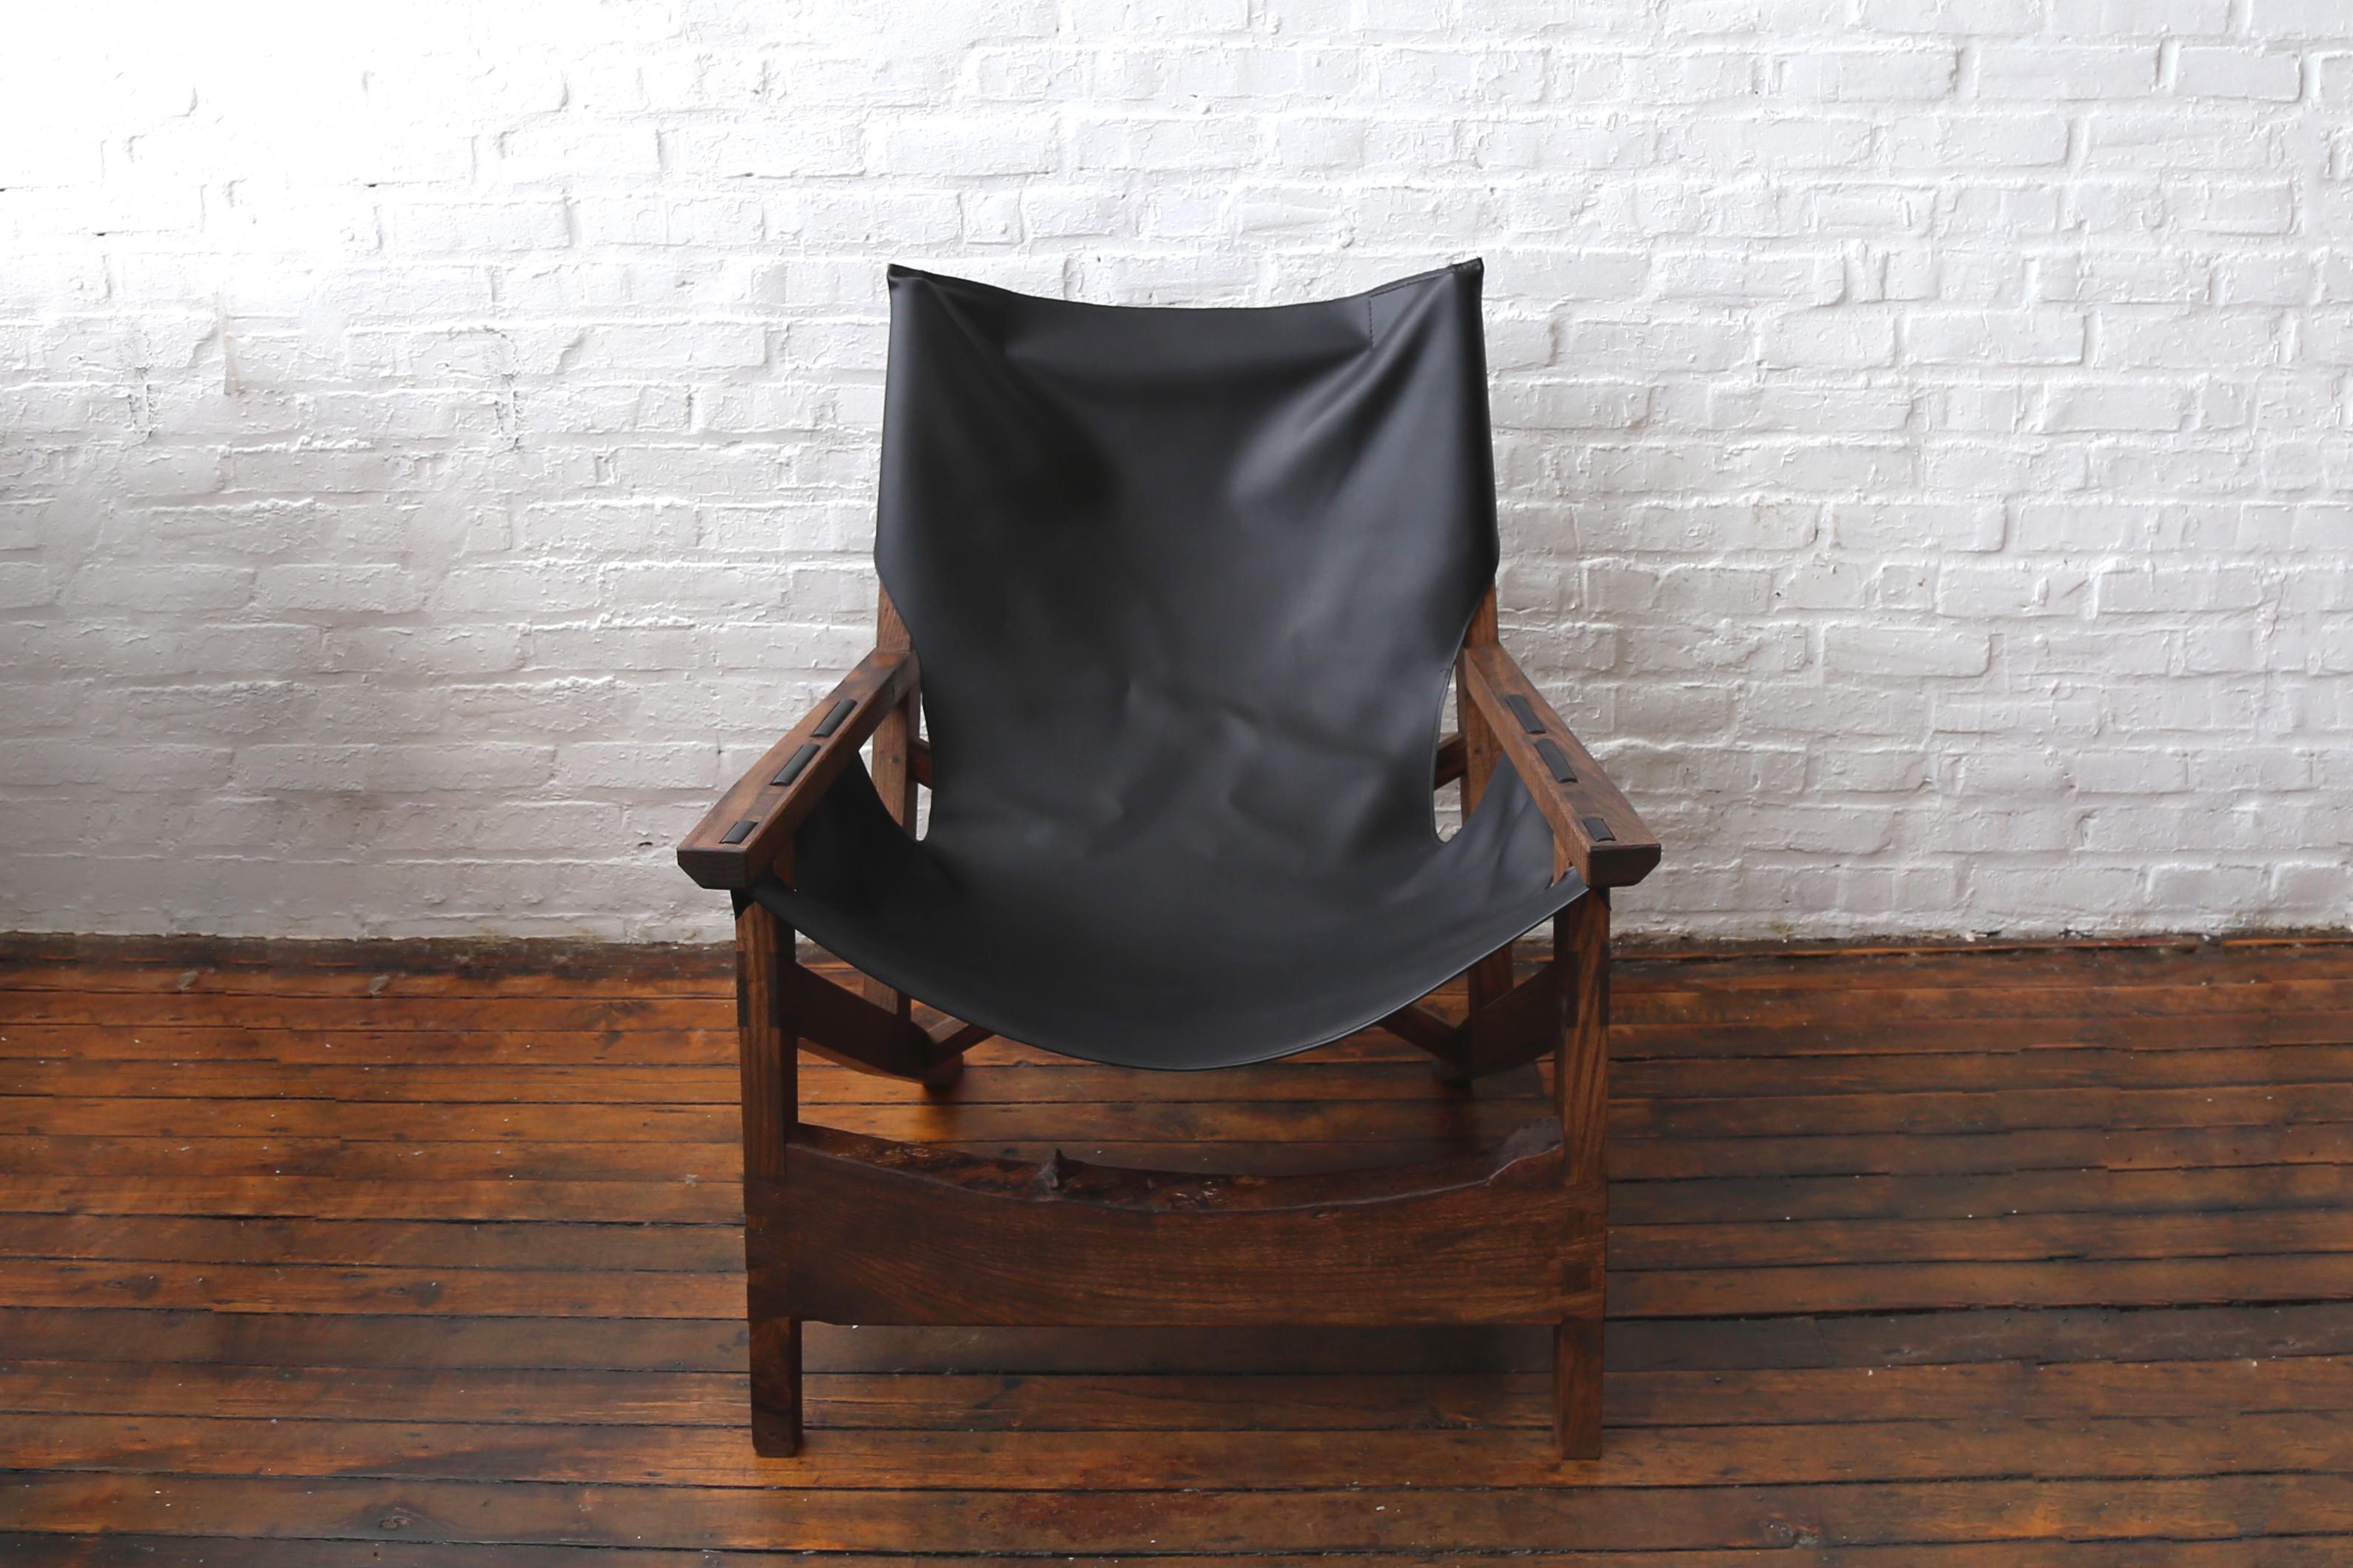 We are excited to announce that as of Summer 2023 we have a black cactus leather sling option for our original sling chair design. This is our radical, sustainable, gorgeous alternative to using animal products in our furniture. We are a